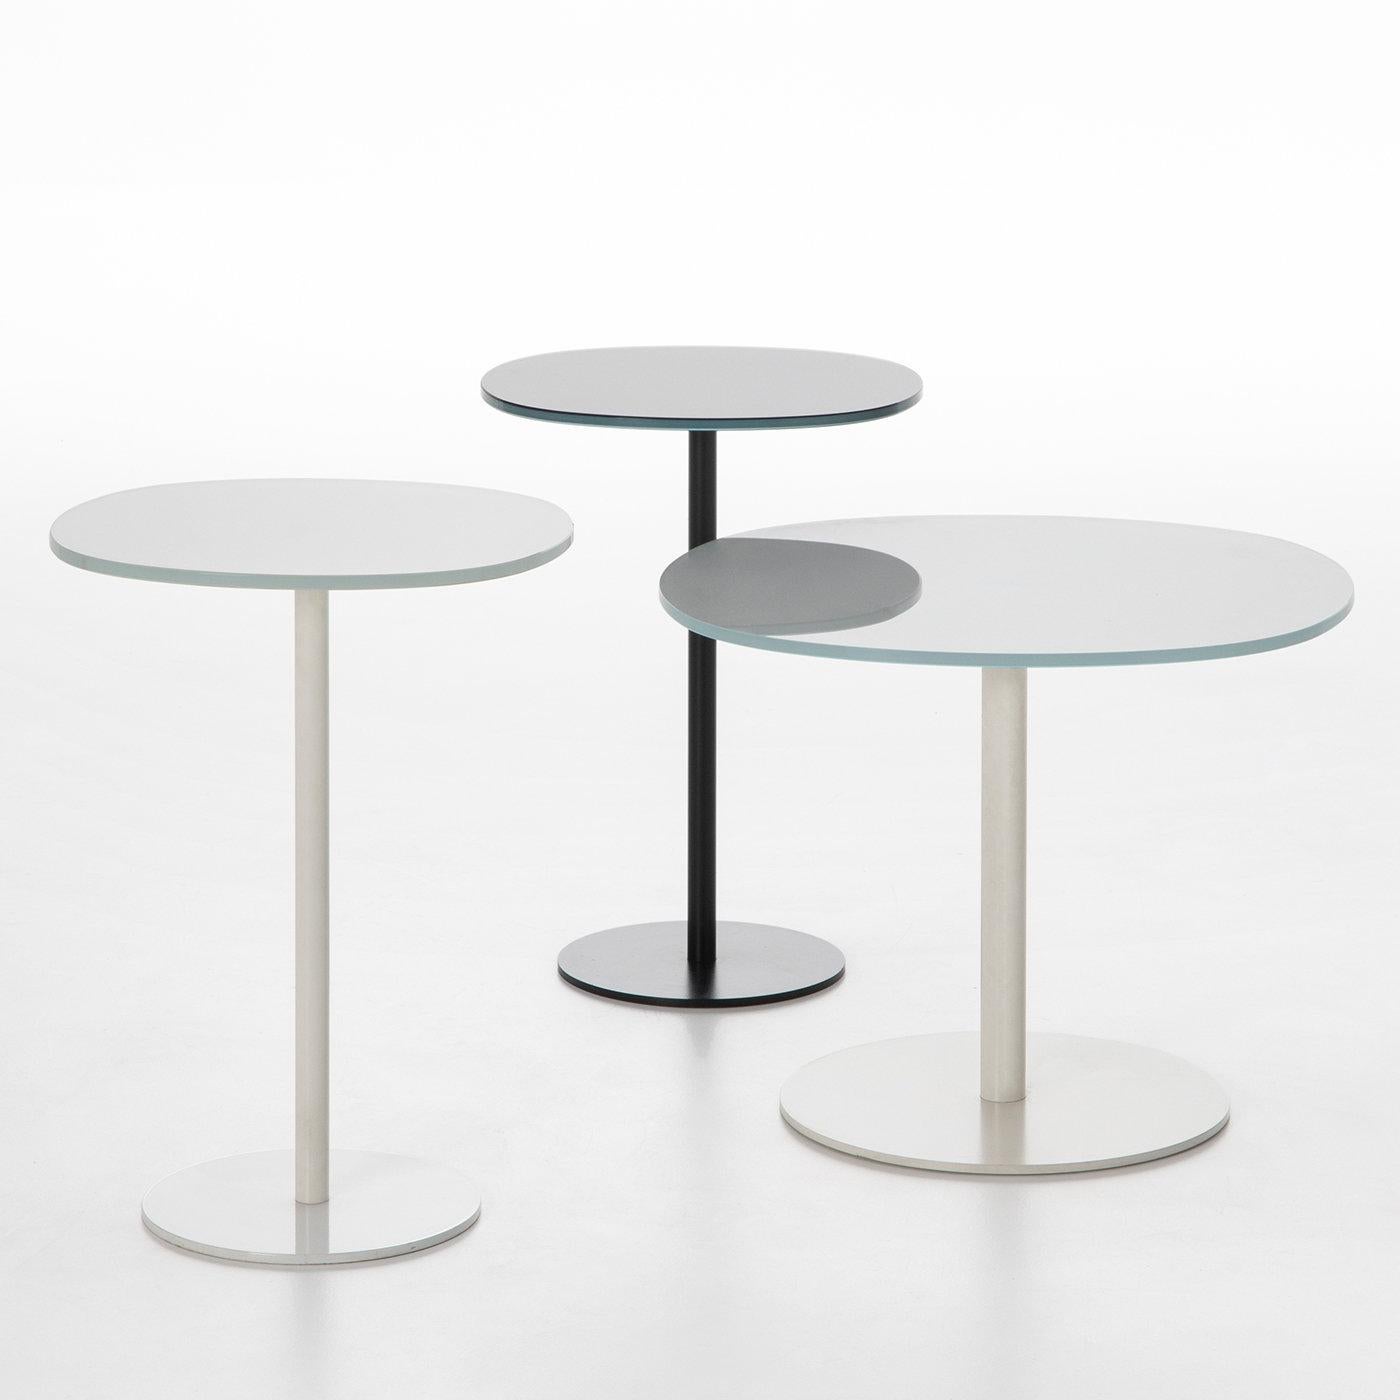 When designing this side table designer Piero Lissoni decided to enliven minimalist shapes with a subtle twist that interrupts its deceptive formal rigor. A distinctive trait of the piece is the irregular profile of its top in extra-clear glass top